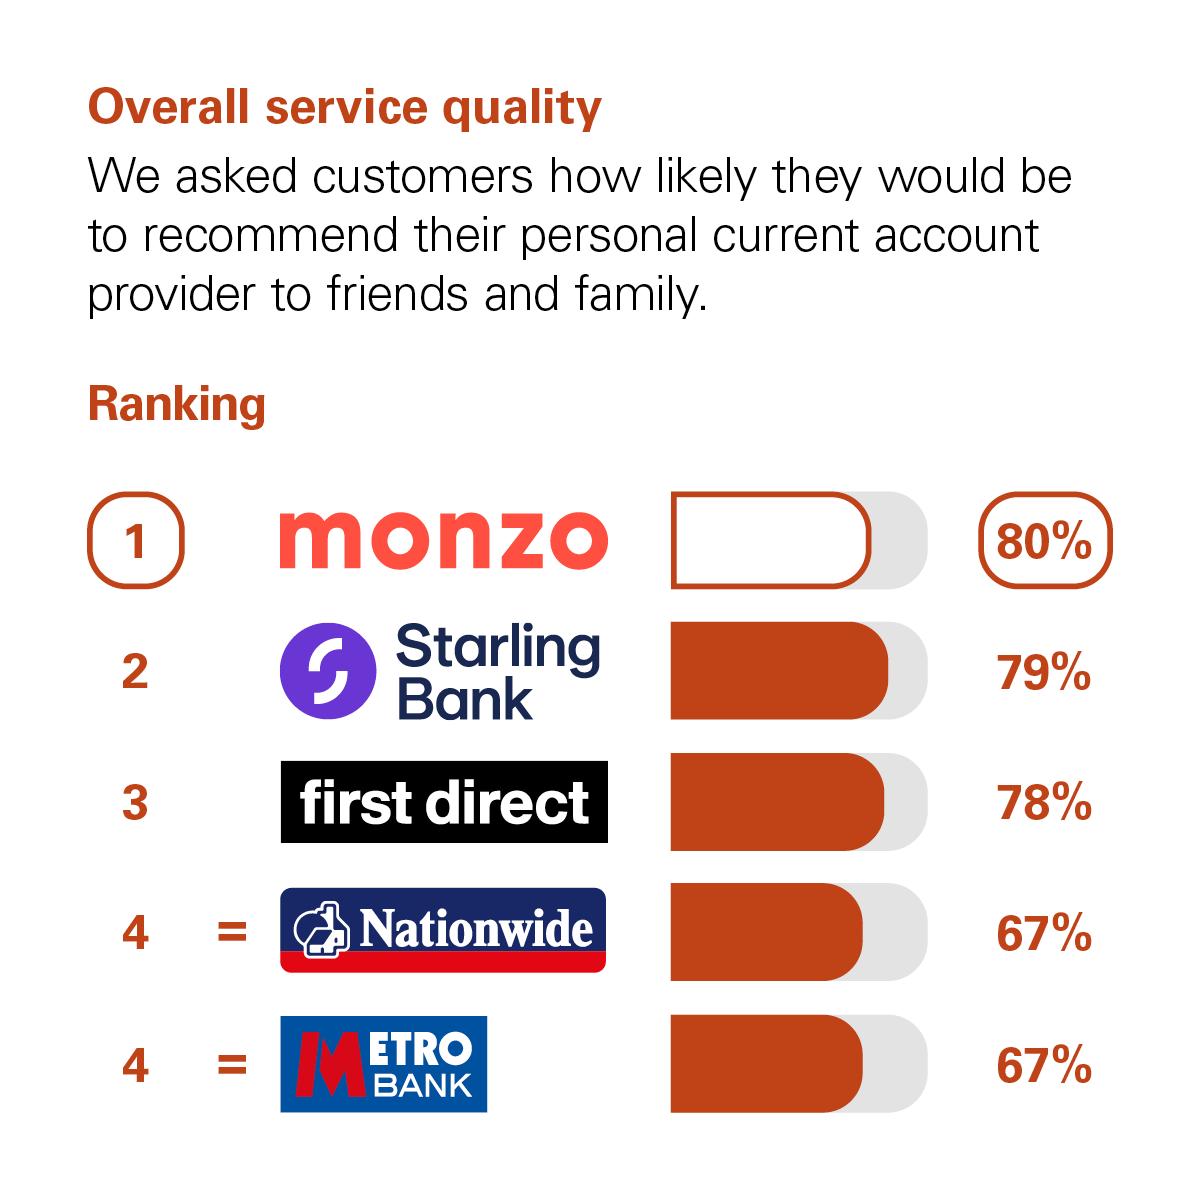 Graph showing the results of the CMA scoring of UK banks in the Overall Service Quality category. The CMA asked customers how likely they would be to recommend their personal current account provider to friends and family. The rankings with percentage scores are: 1st Monzo with 80%. 2nd Starling Bank with 79%. 3rd First Direct with 78%. Joint 4th are Nationwide and Metro Bank with 67%.